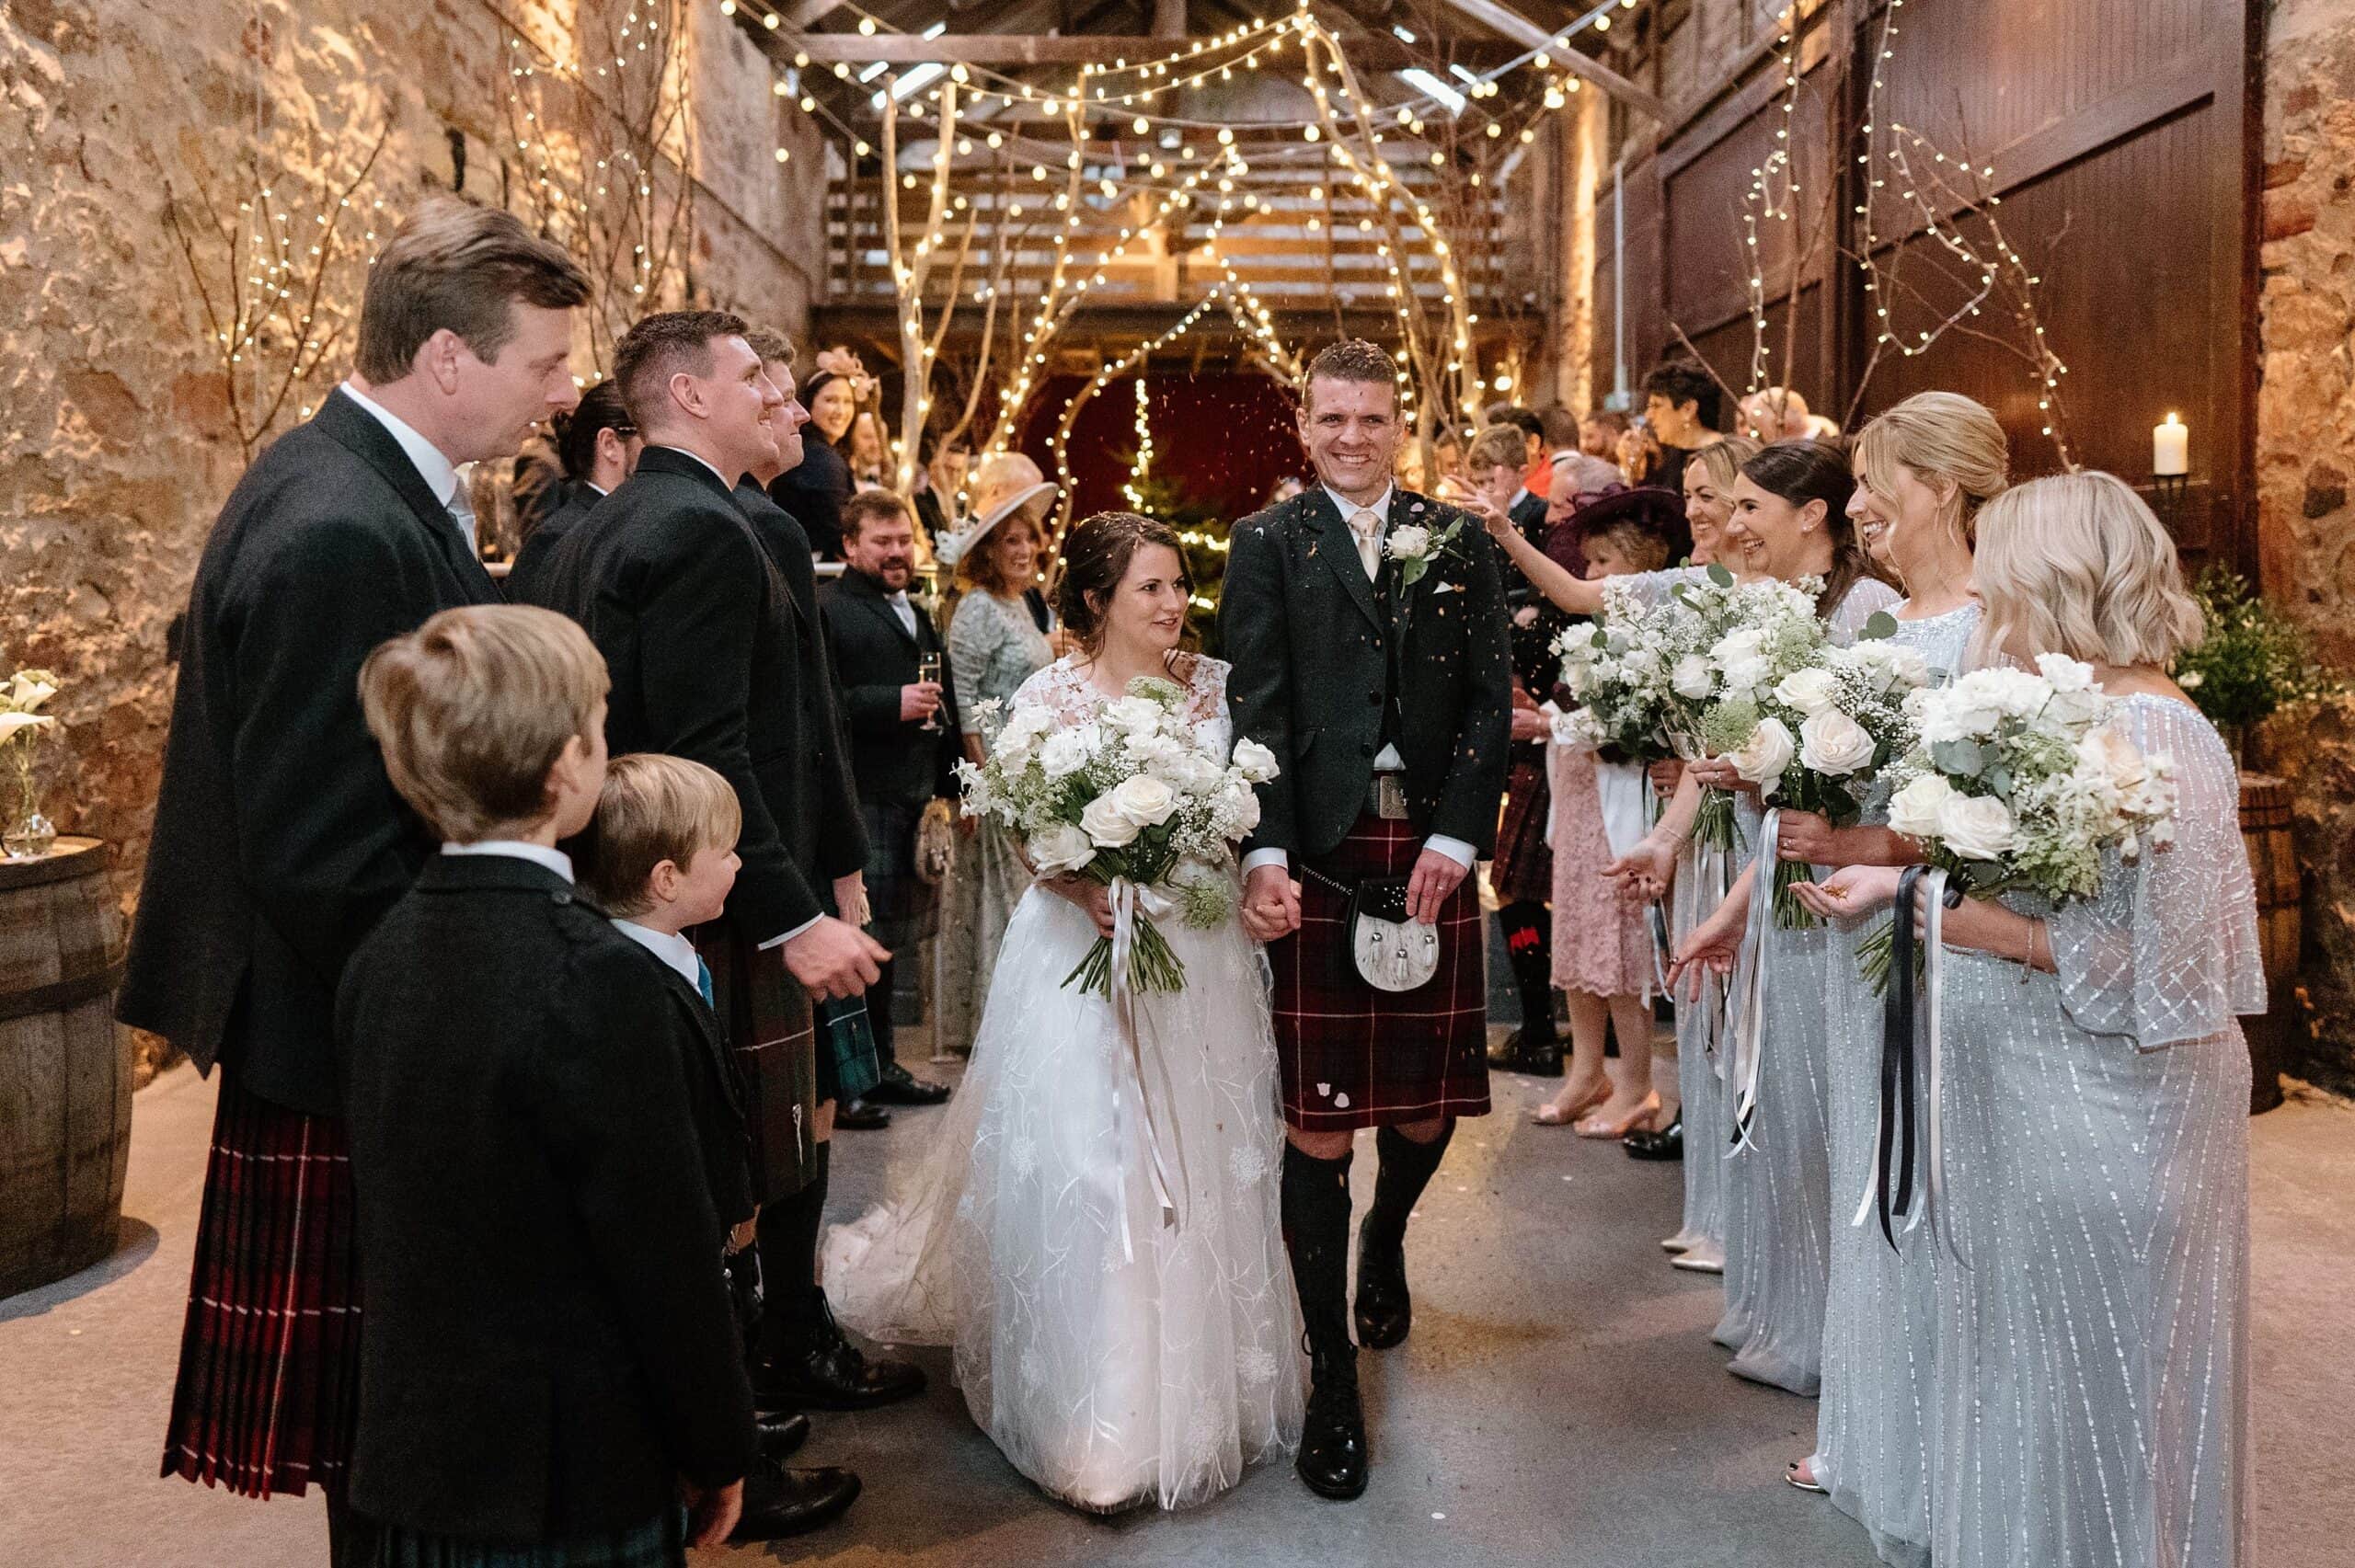 kinkell byre wedding photos interior inside view of farm barn wedding venue st andrews scotland with fairy lights with bride and groom